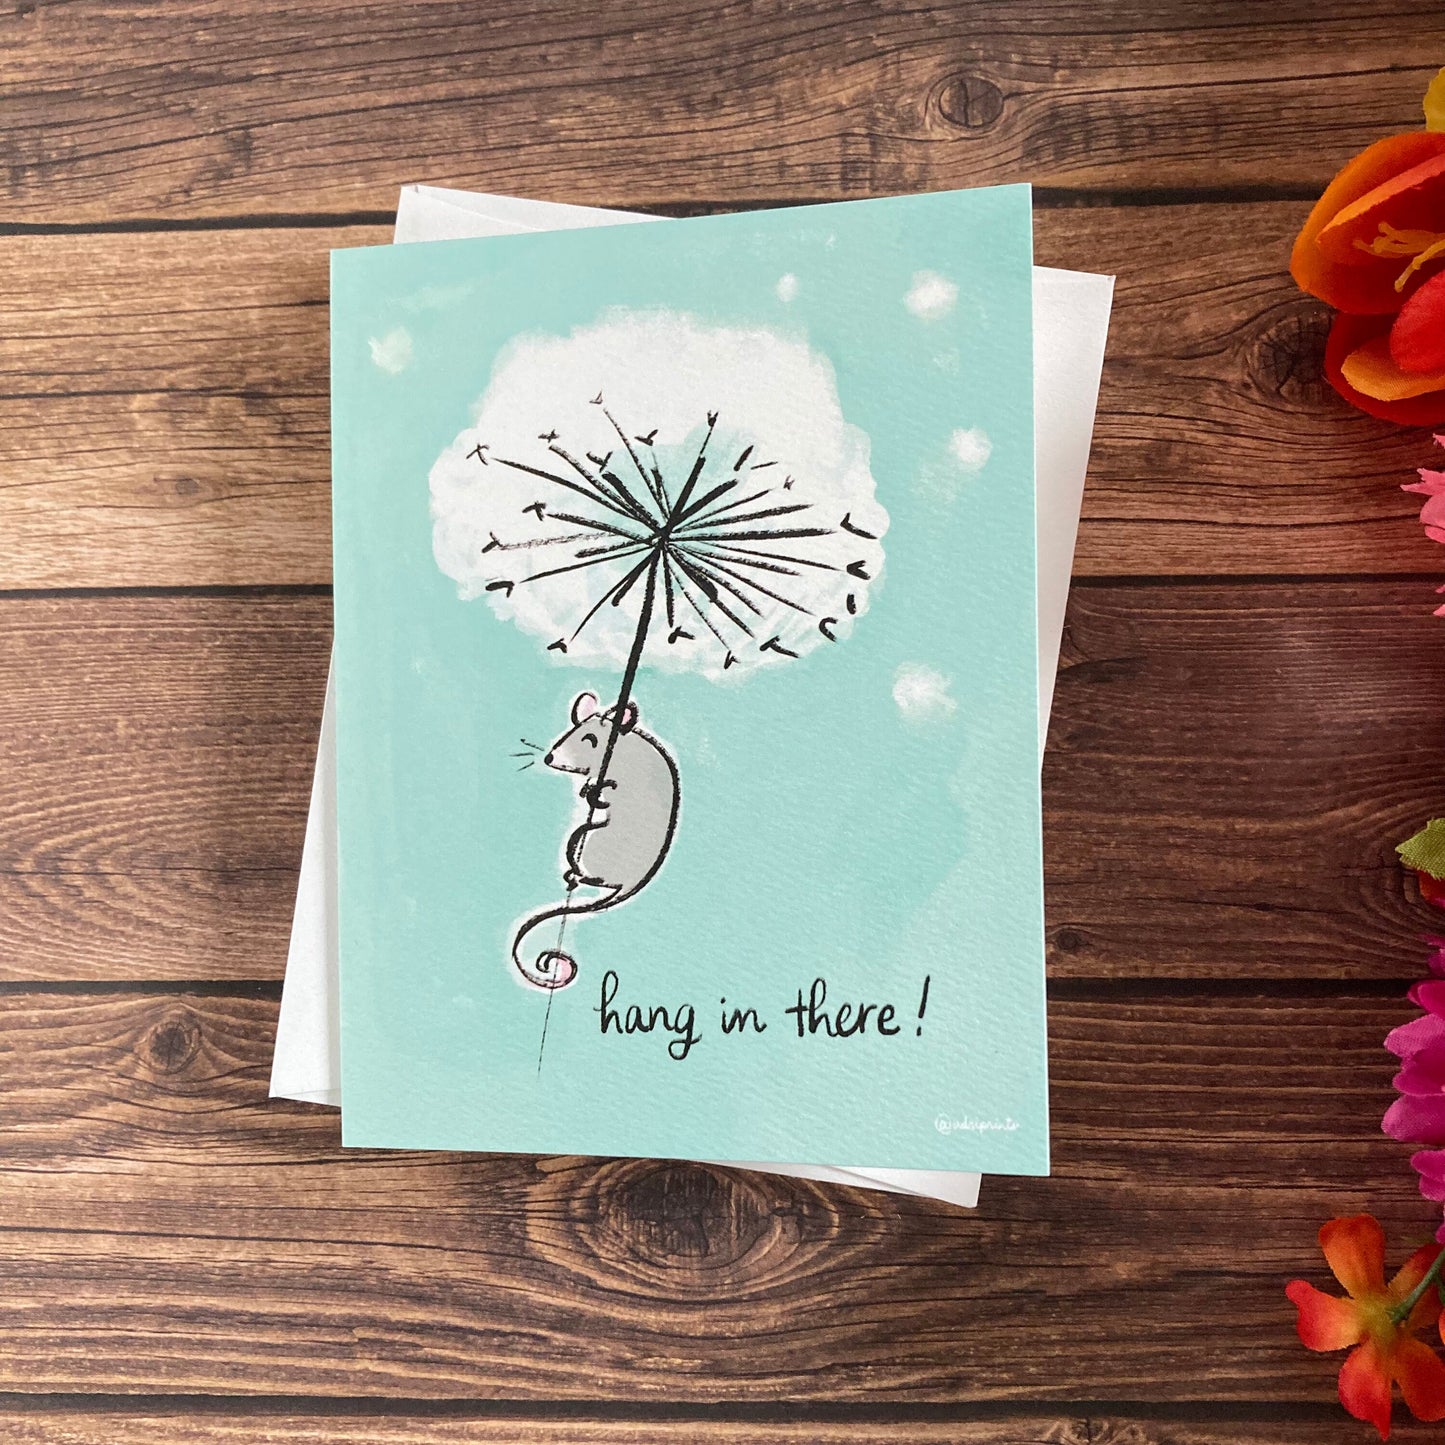 EVERYDAY - Hang in There - Hopeful, supportive card featuring Art by Adriana Bergstrom